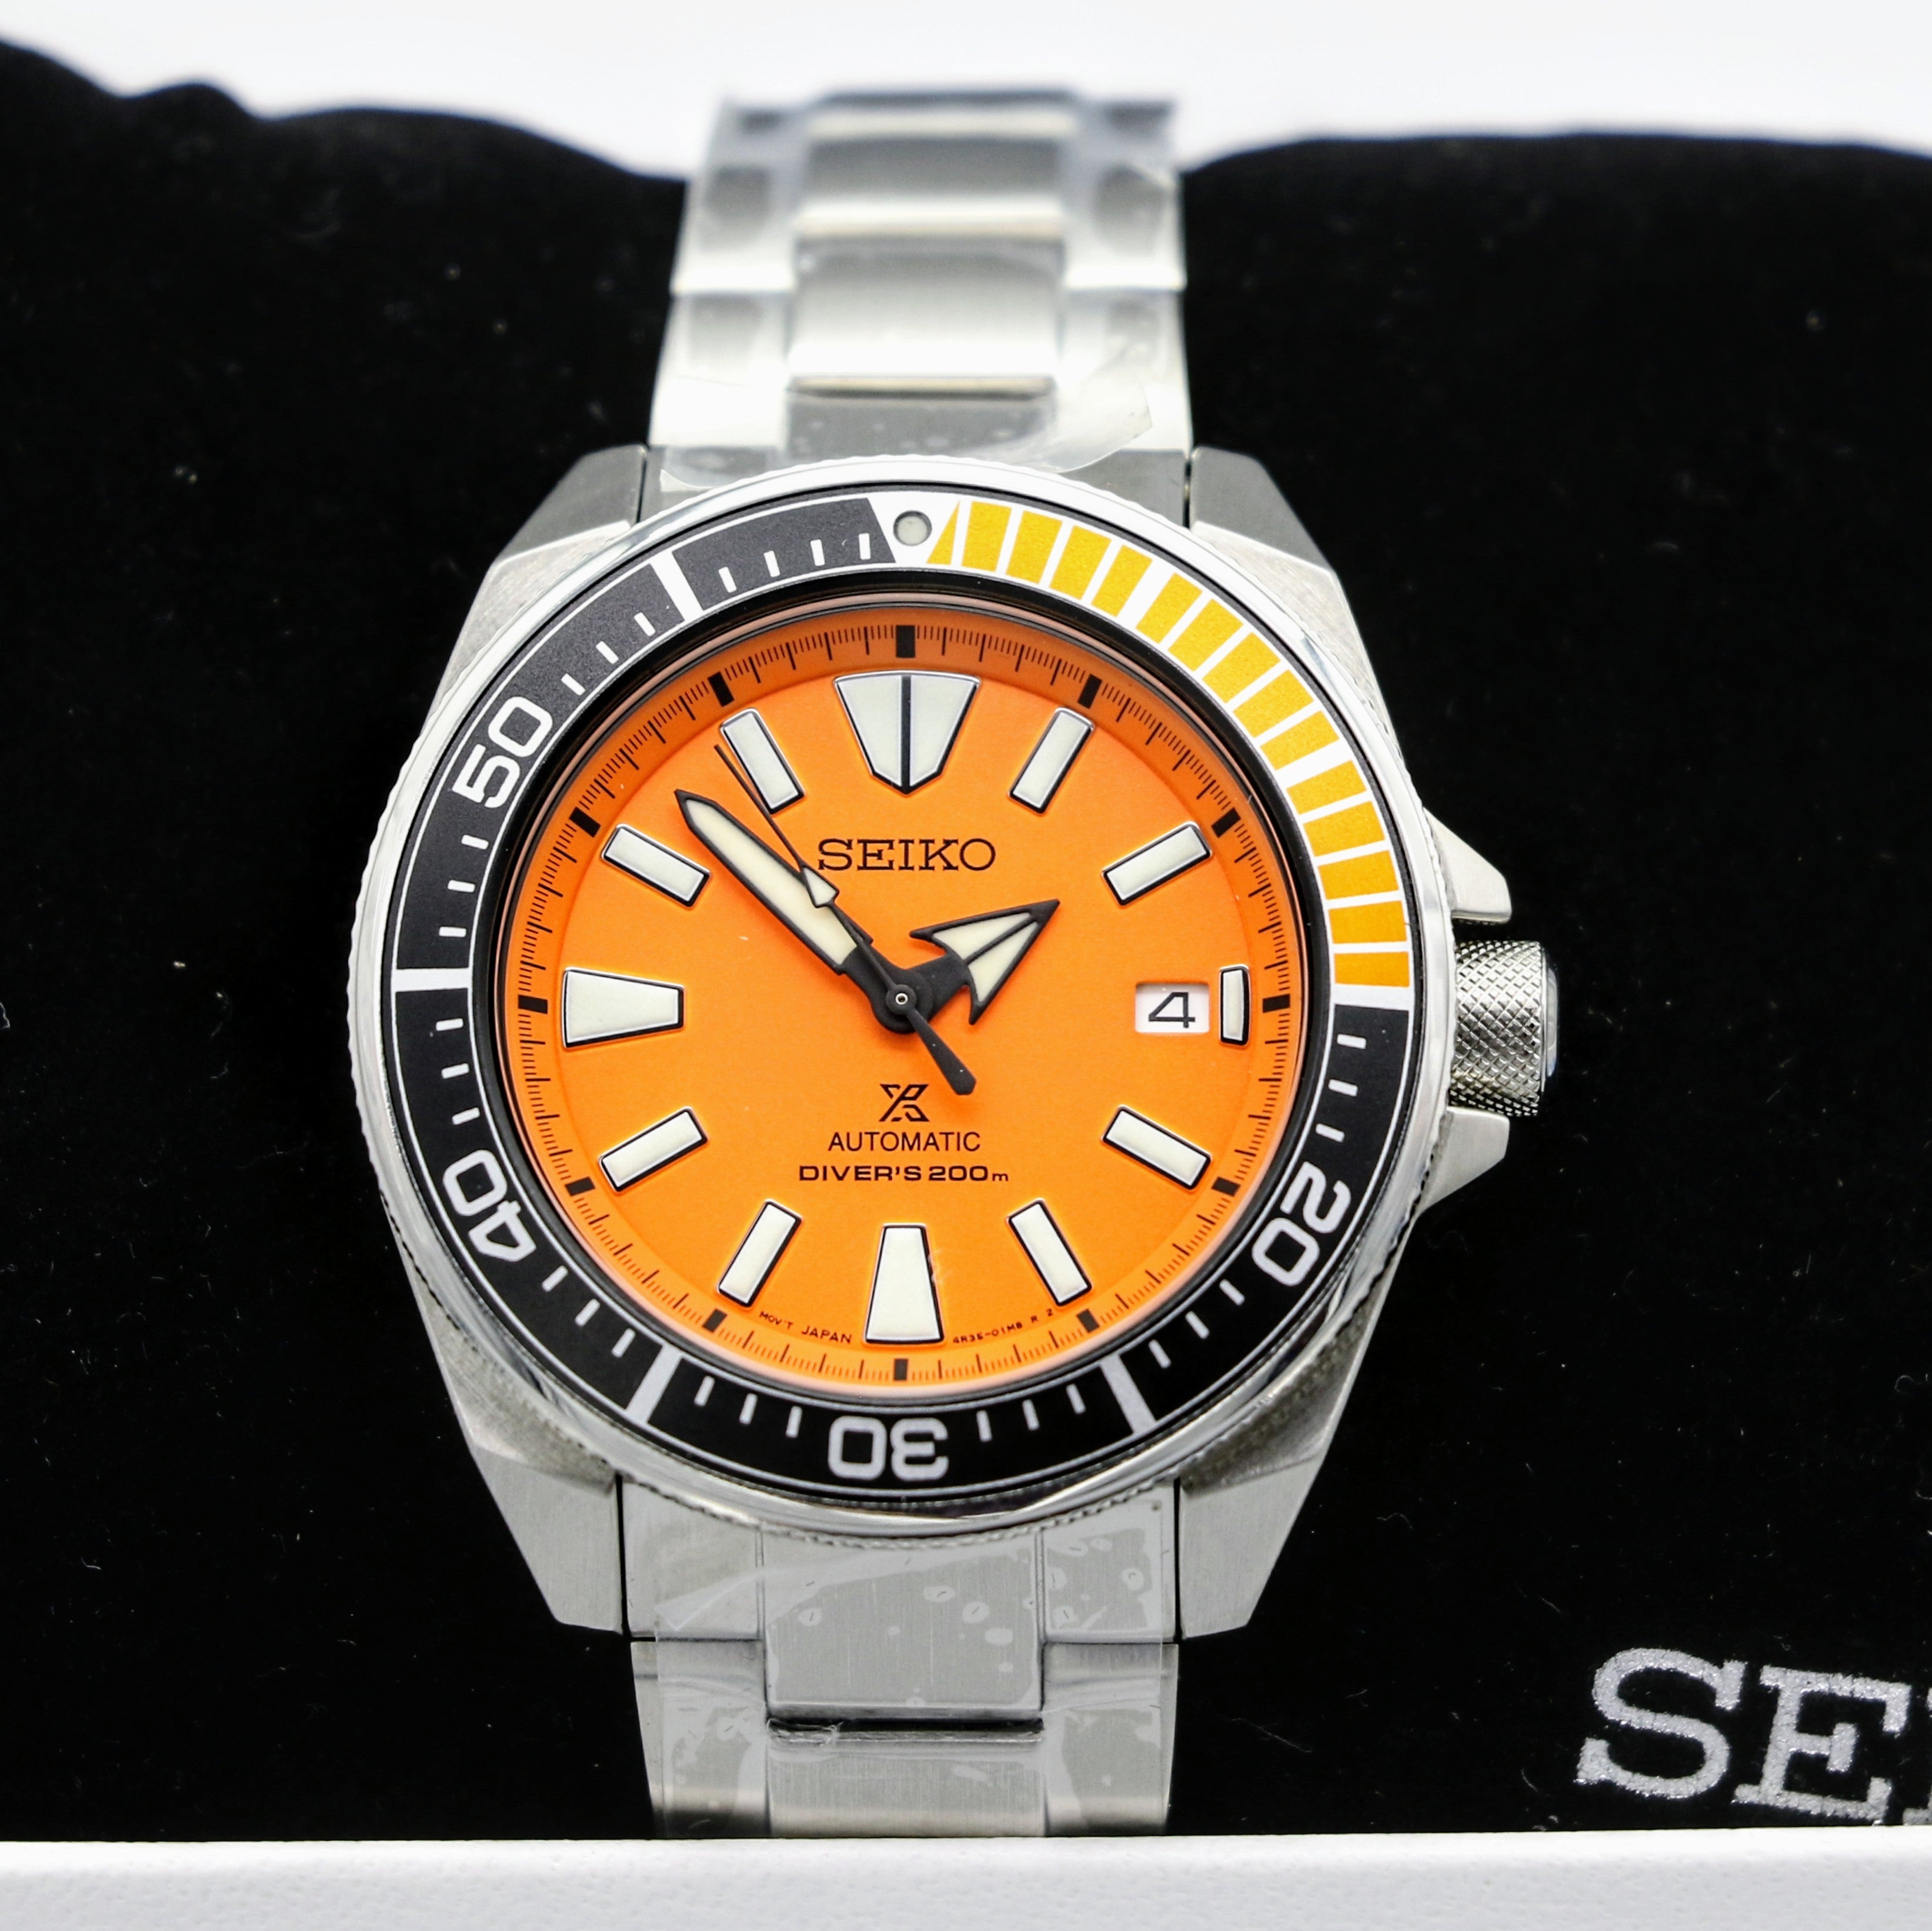 NEW W/ BOX & PAPERS SEIKO Prospex Automatic Diver's DISCONT – HAND HOROLOGY